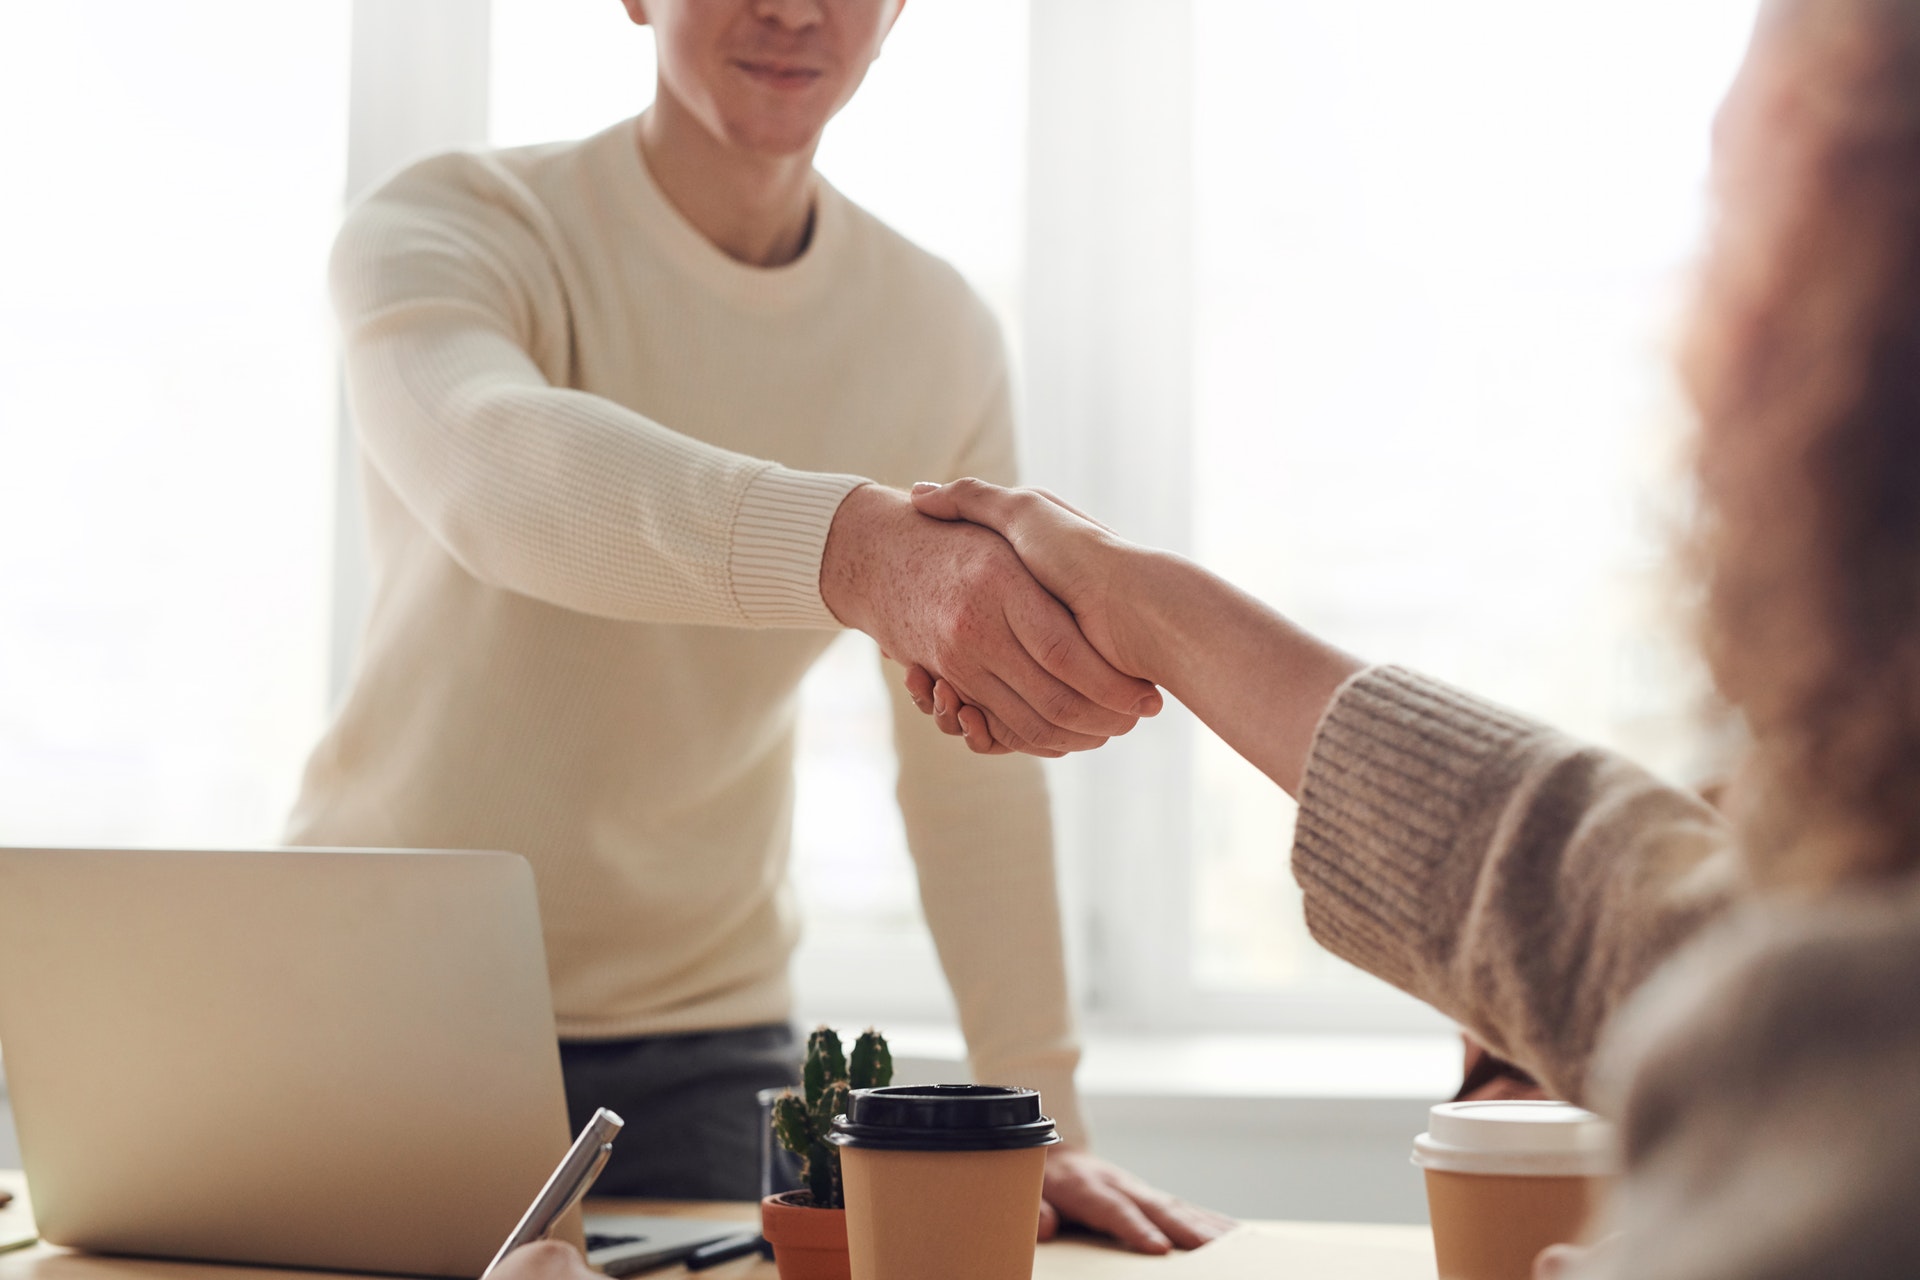 Real estate agent candidate shaking hands before interview